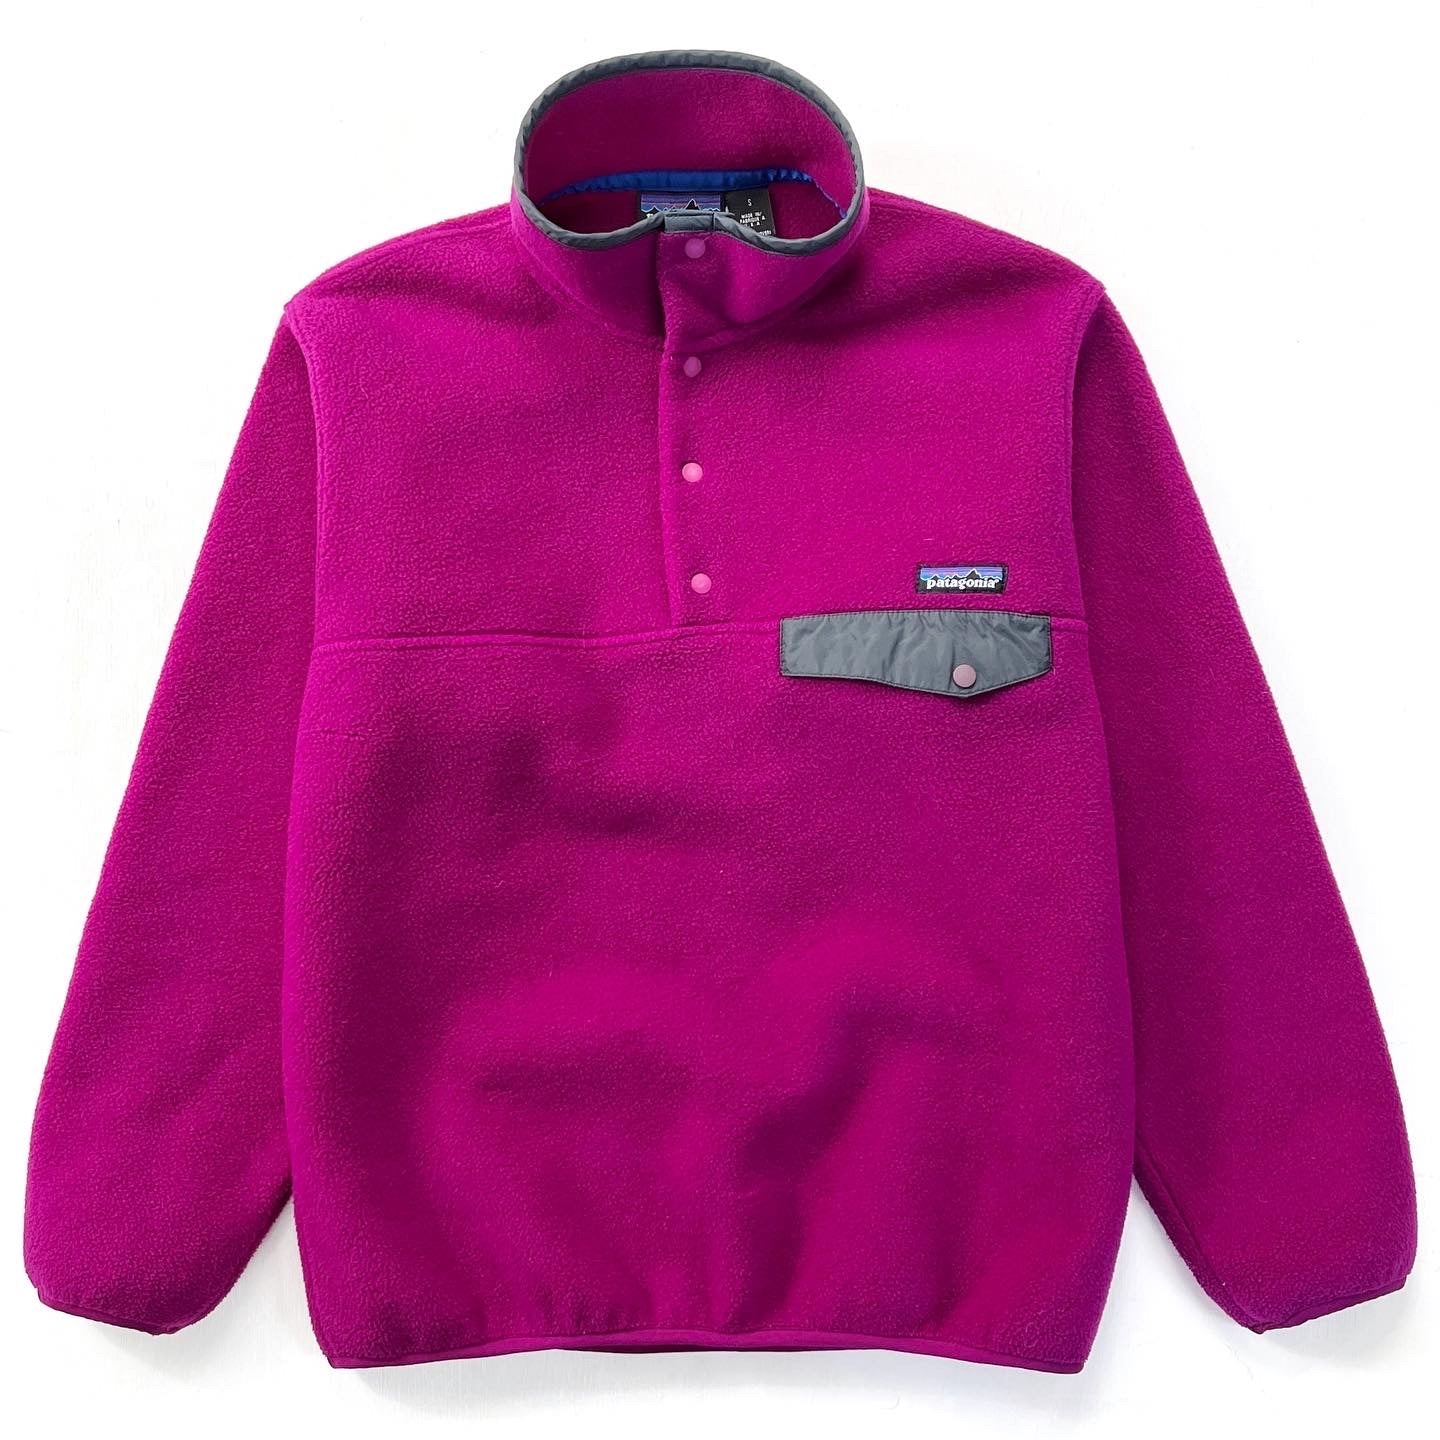 1999 Patagonia Made In The U.S.A. Synchilla Snap-T, Raspberry (S)